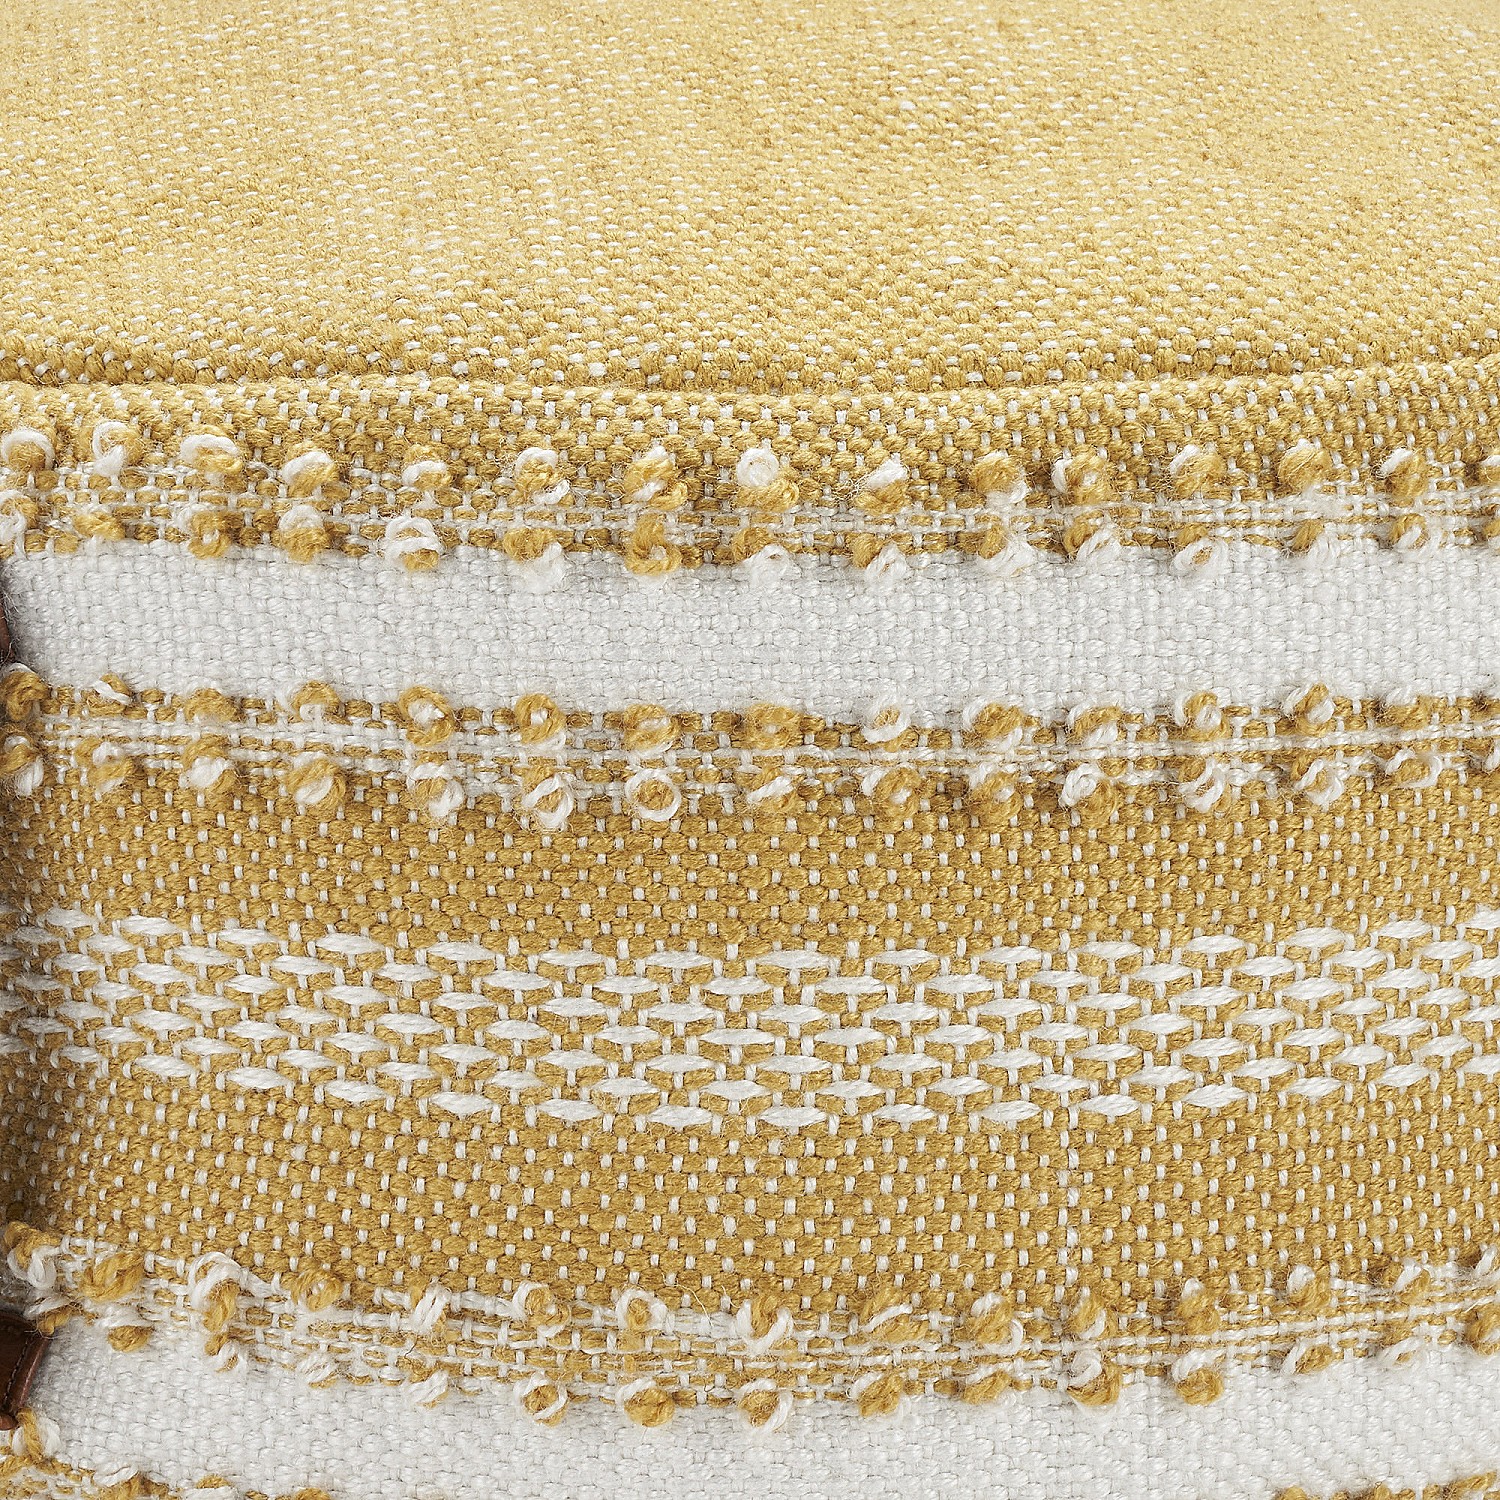 Mina Victory  Woven Stripes & Dots 20" x 20" x 12" Yellow Outdoor Poufs - image 3 of 4